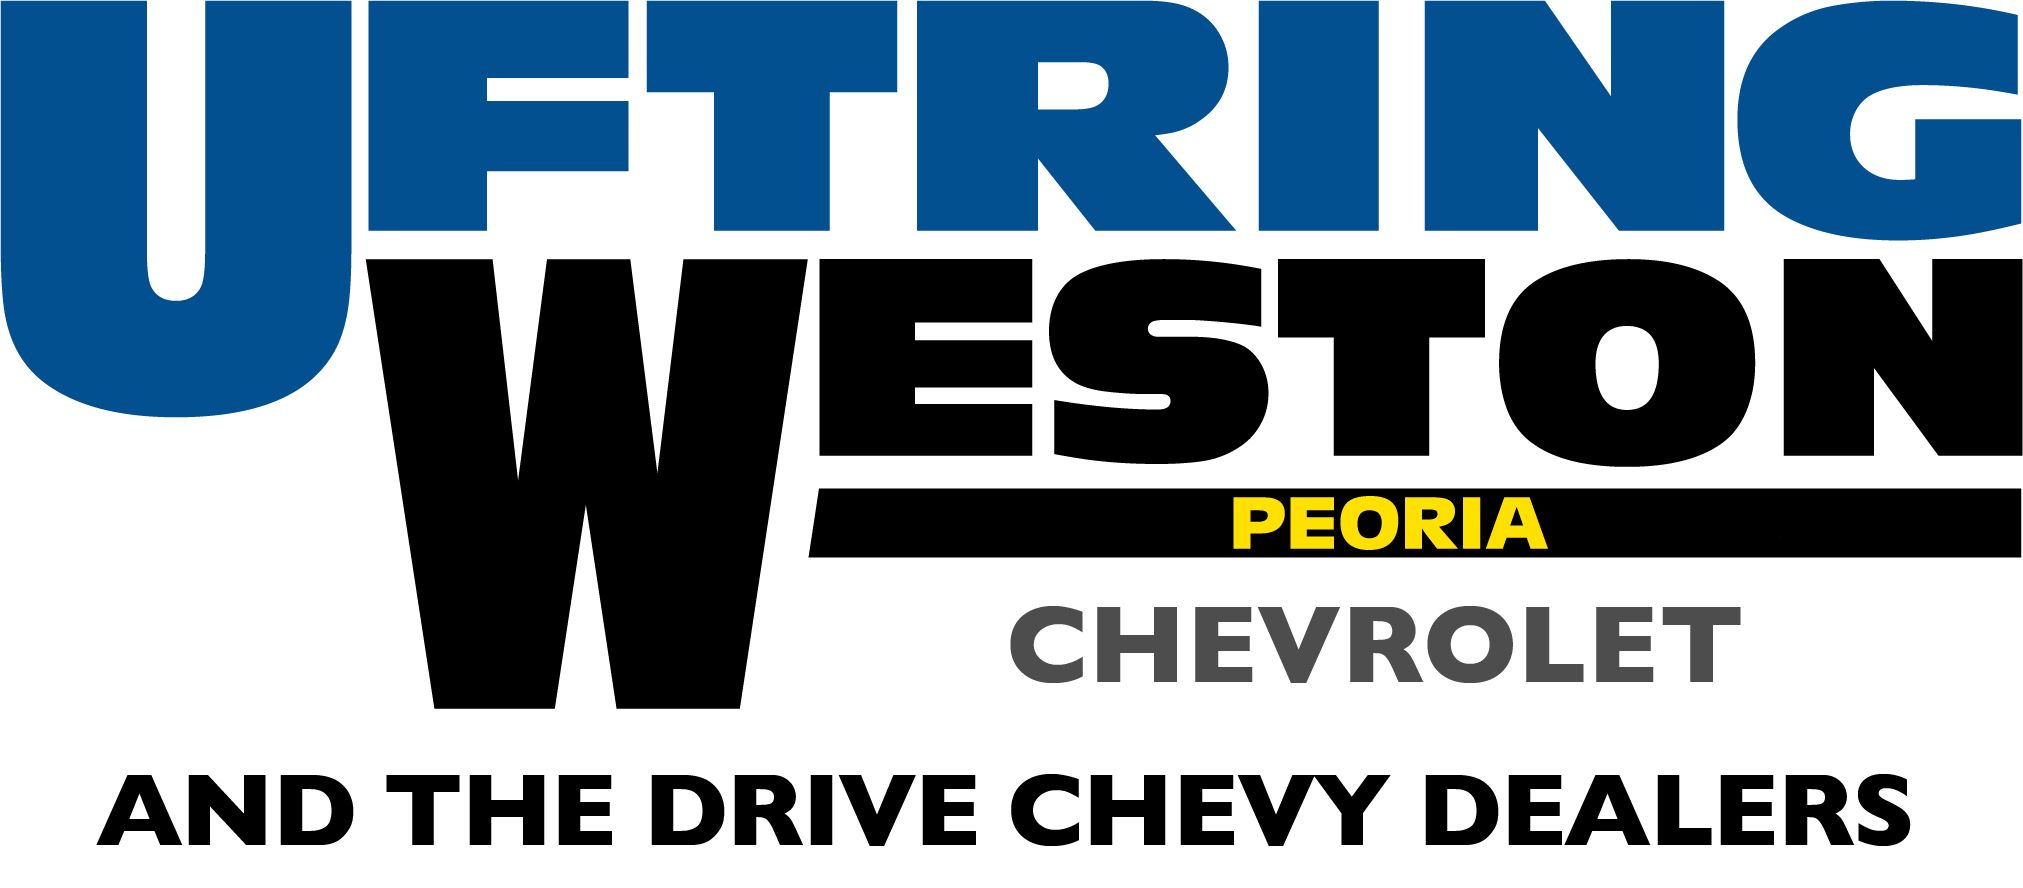 Uftring Weston Chevrolet and The Drive Chevy Dealers